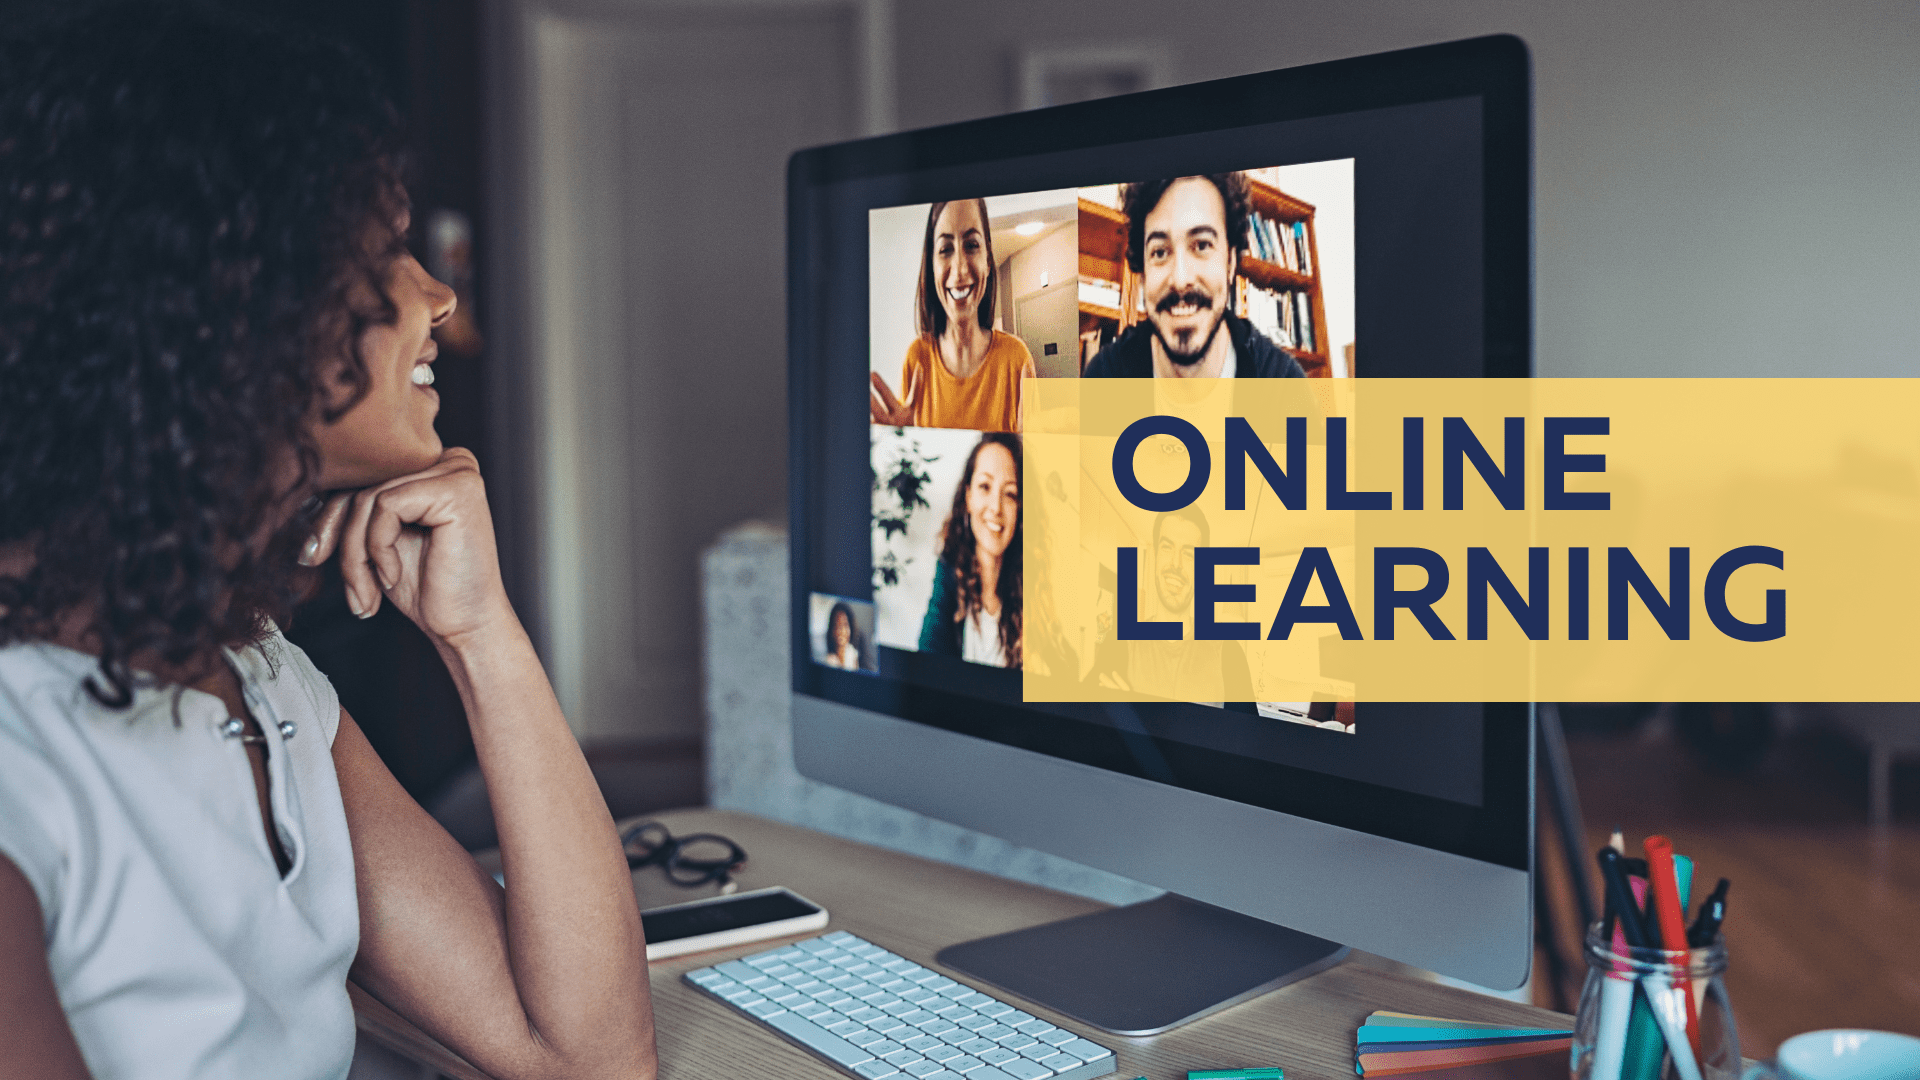 cci training online learning healthcare IT business